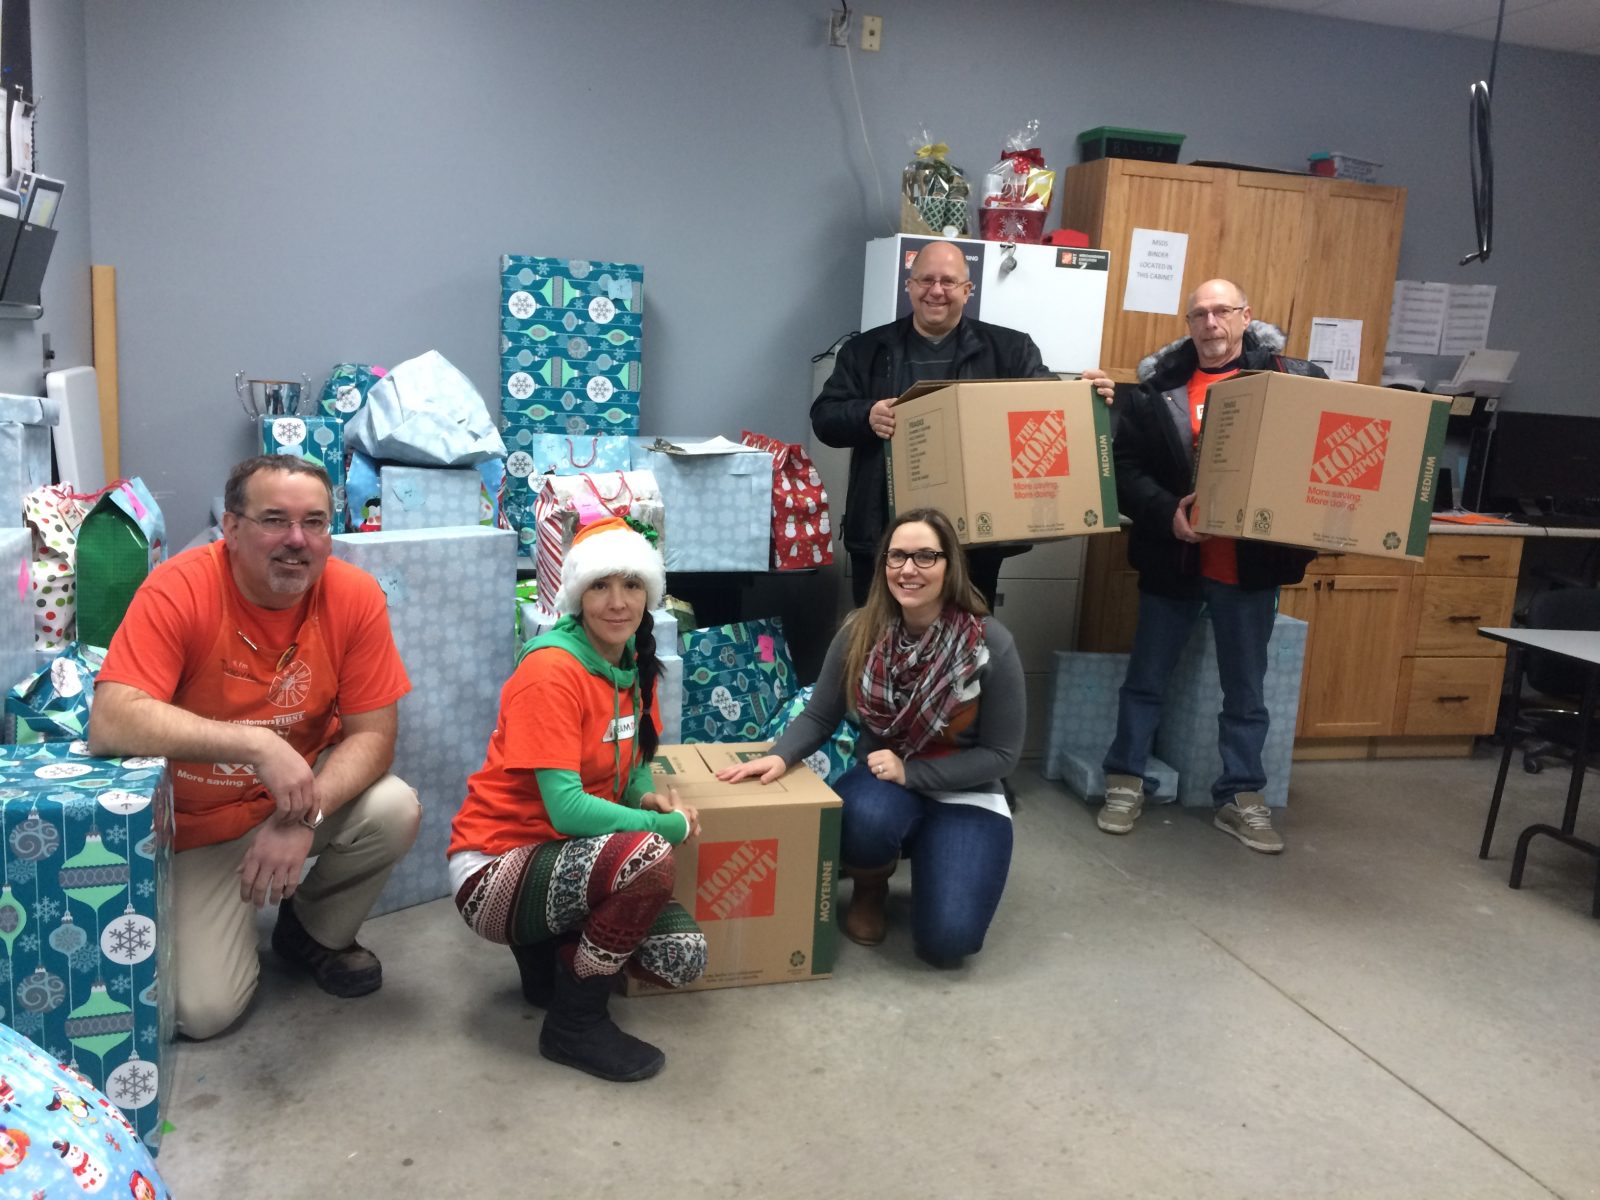 Home Depot continues to give back at Christmas